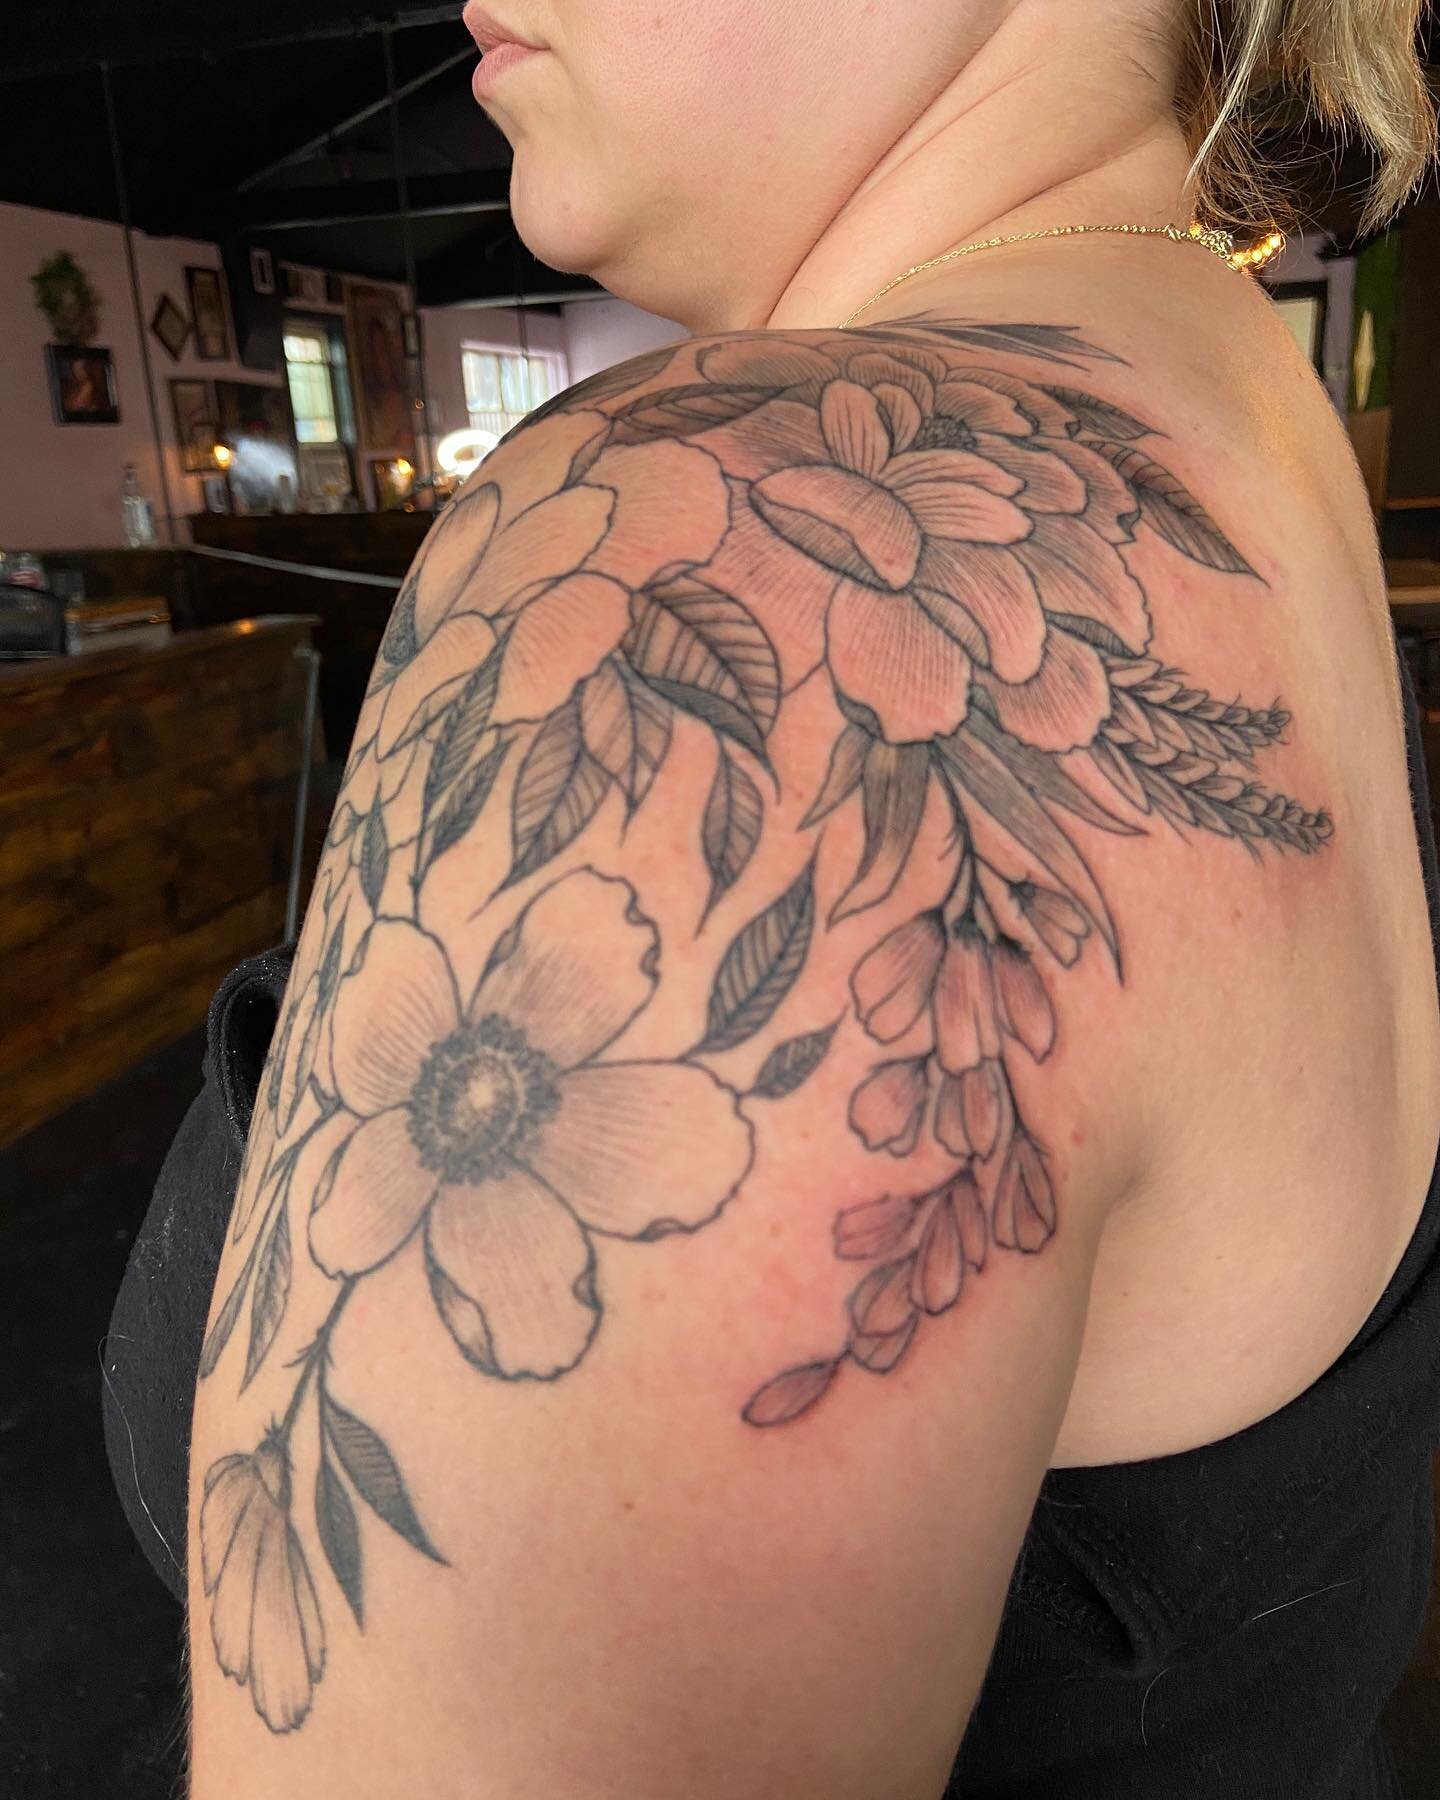 Finished this amazing floral today for kayla! Thanks for hanging tough!